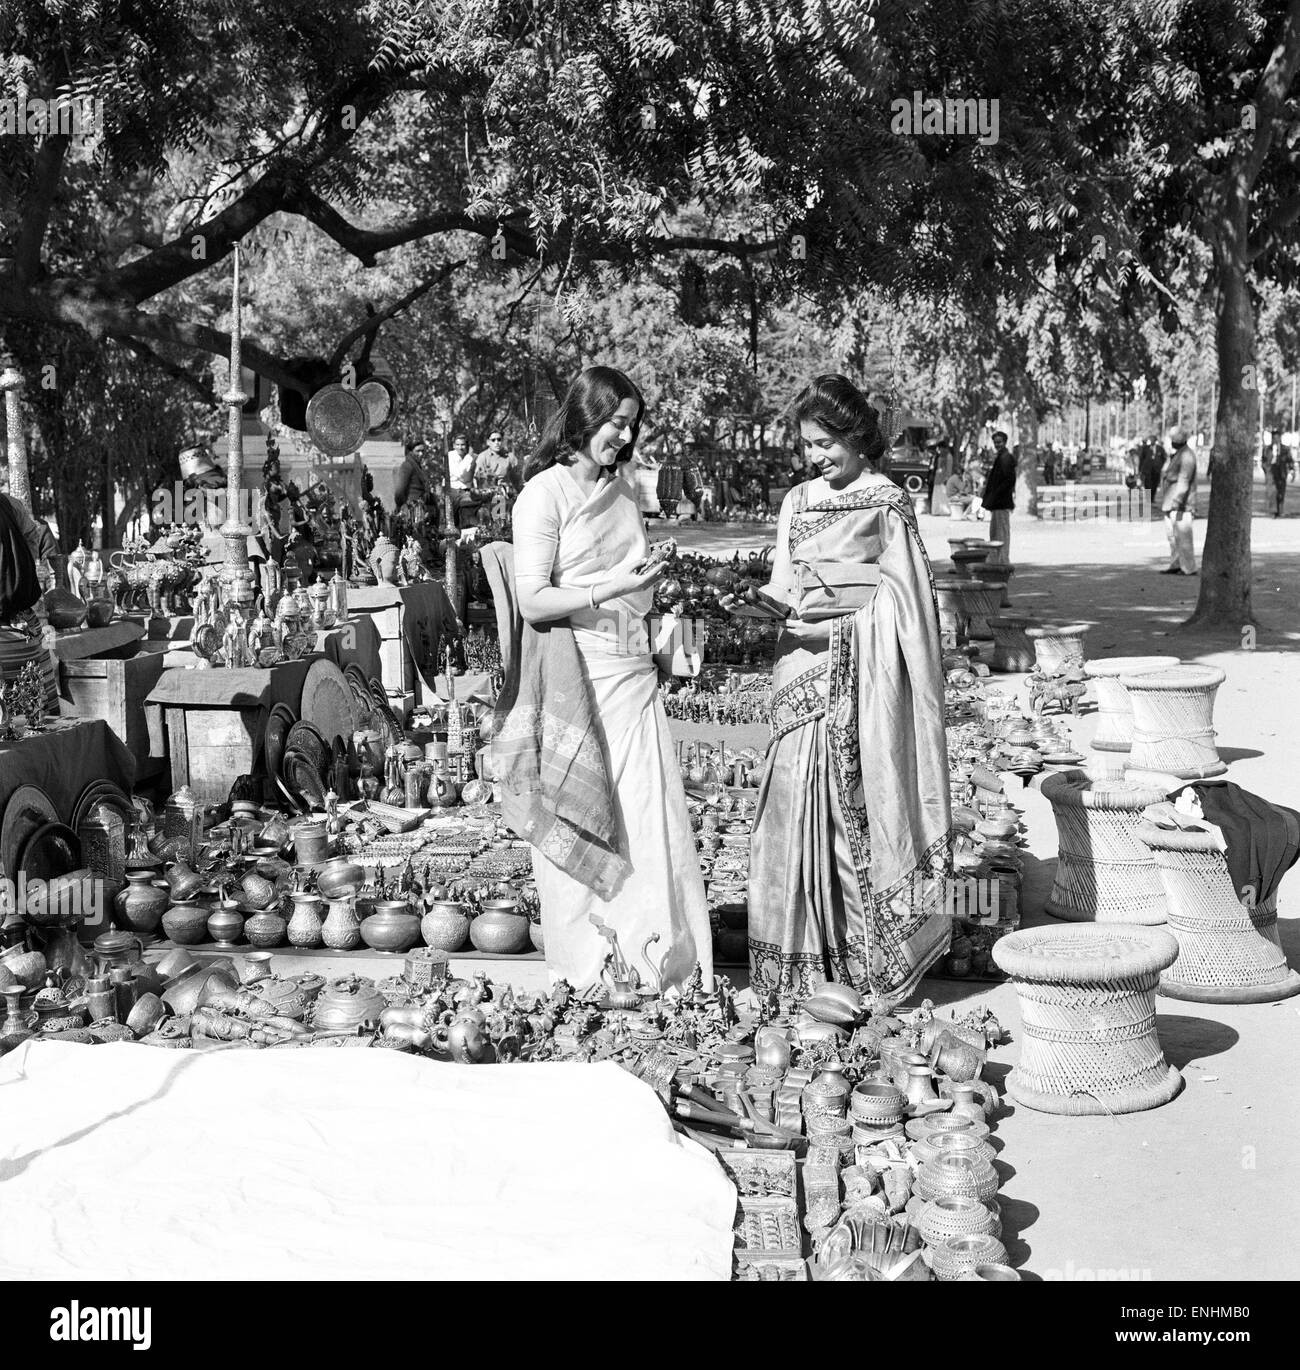 Street scenes, New Delhi, India, January 1961. Two women enjoy a day out shopping. Stock Photo